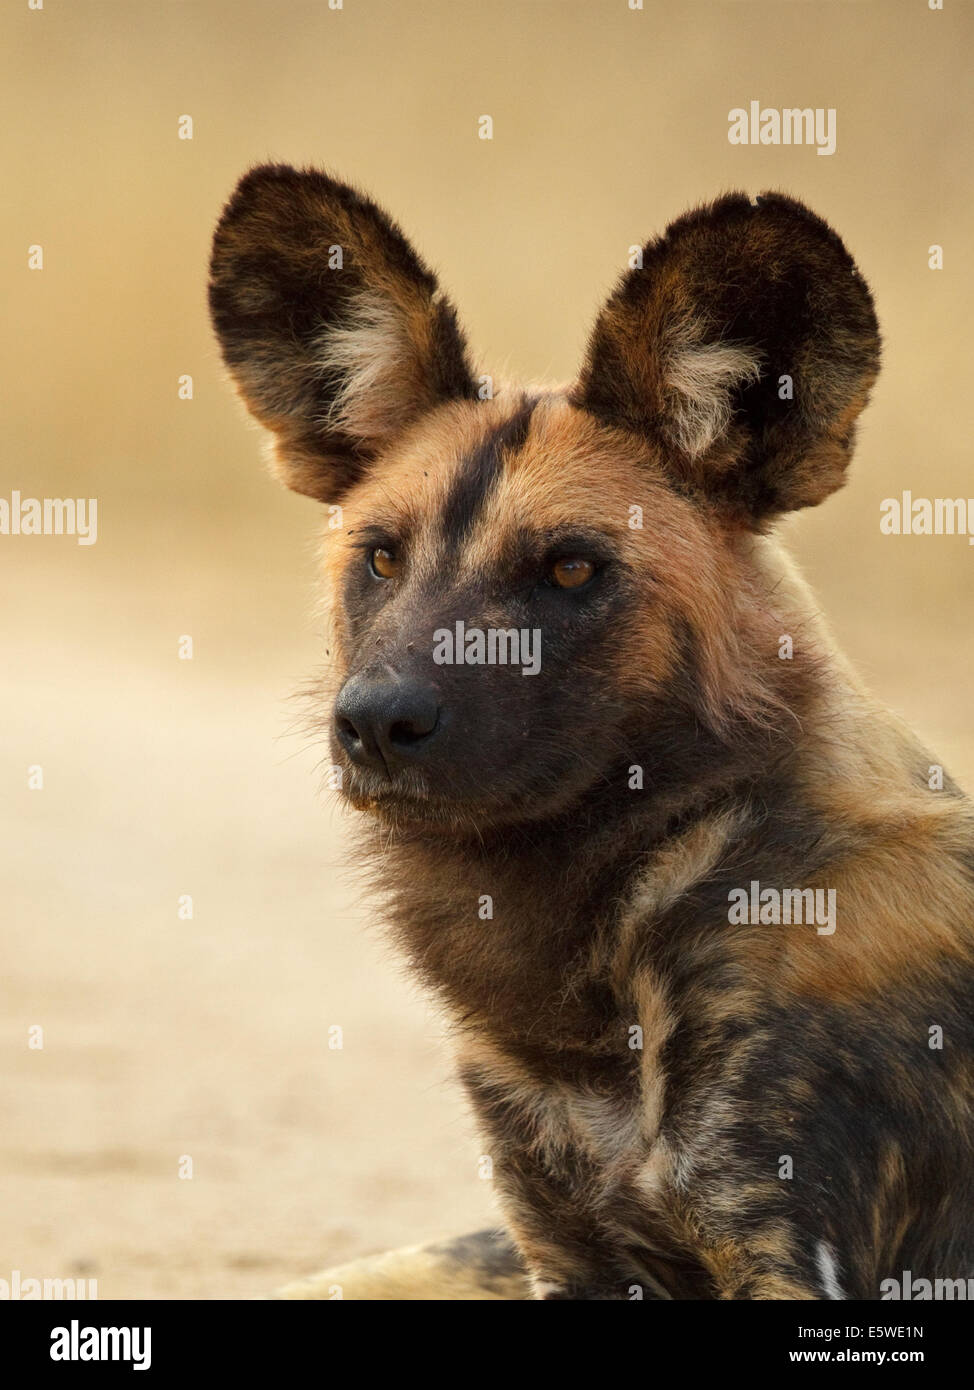 African Wild Dog (Painted Dog) (Lycaon pictus), Stock Photo